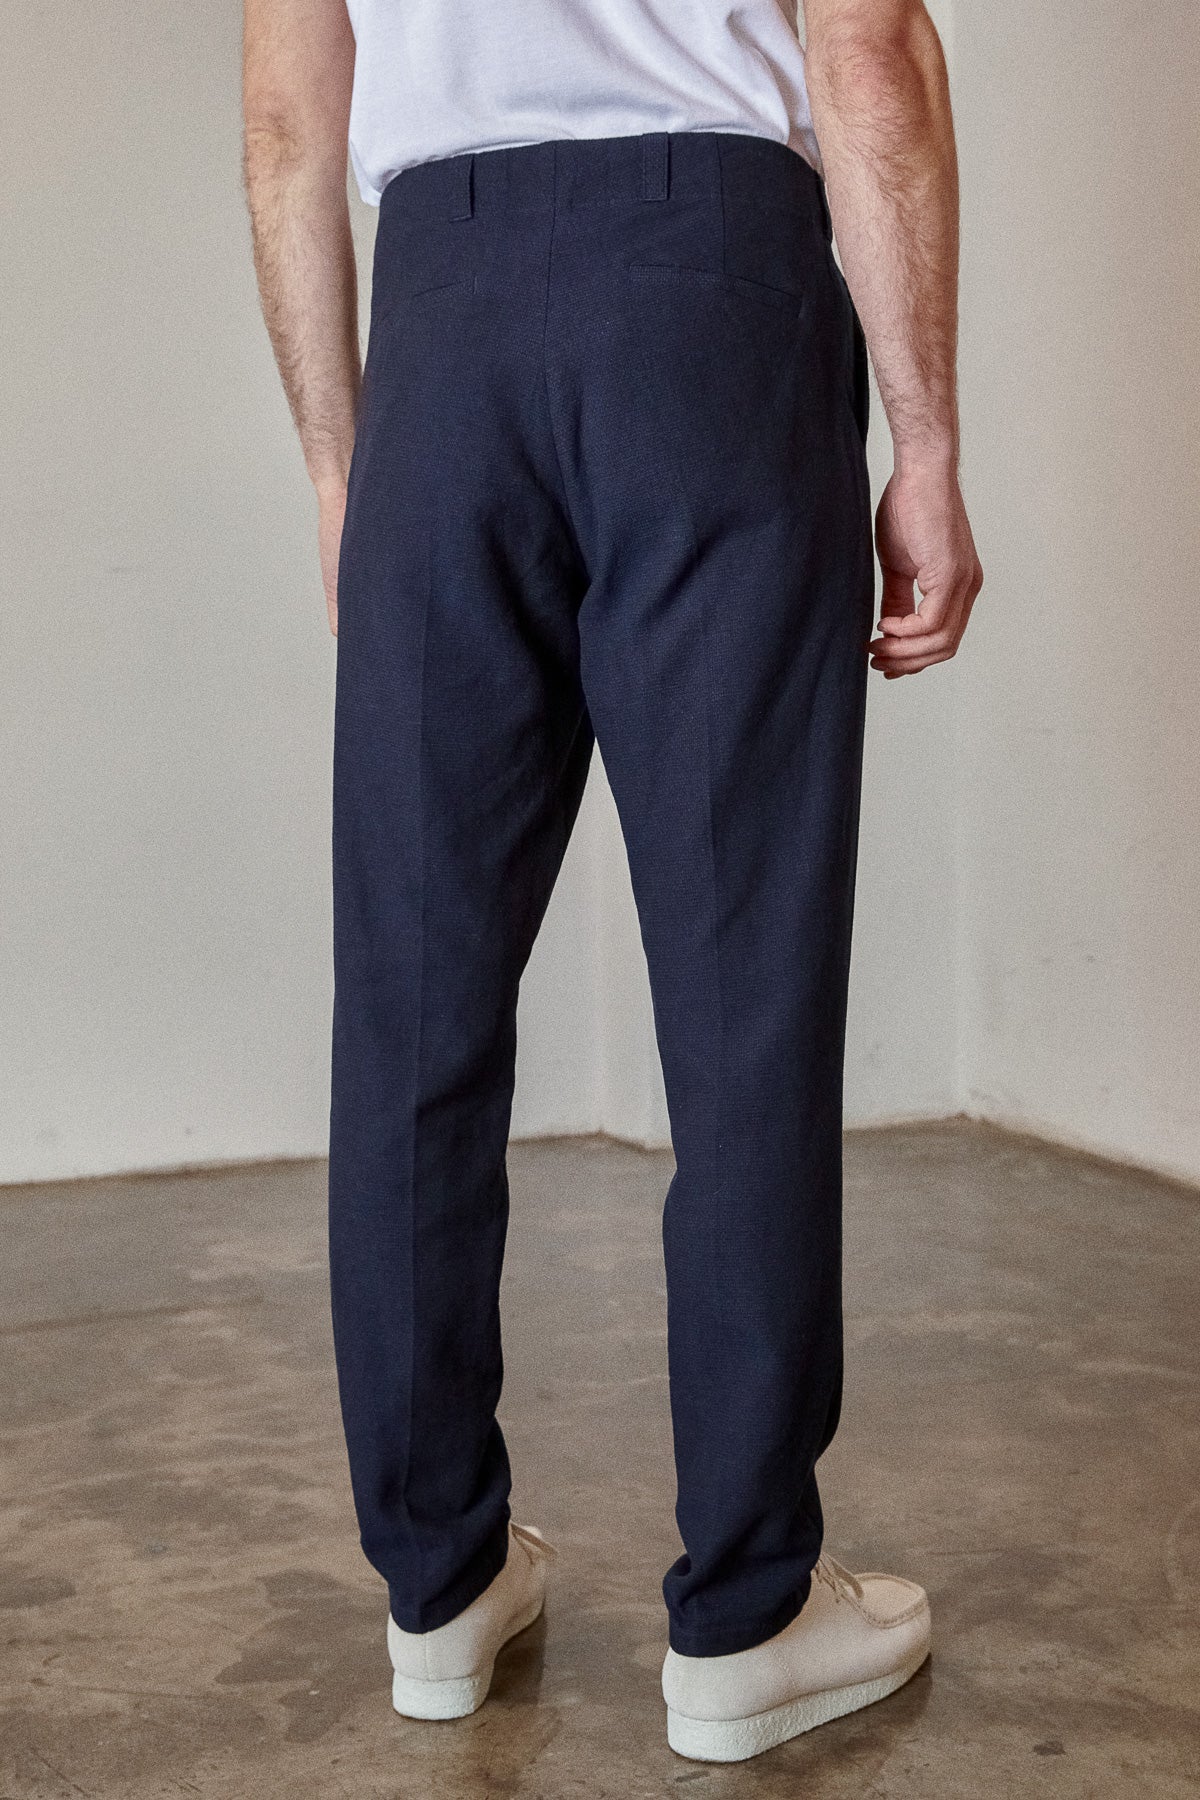 JOSTHA trousers eco structured navy